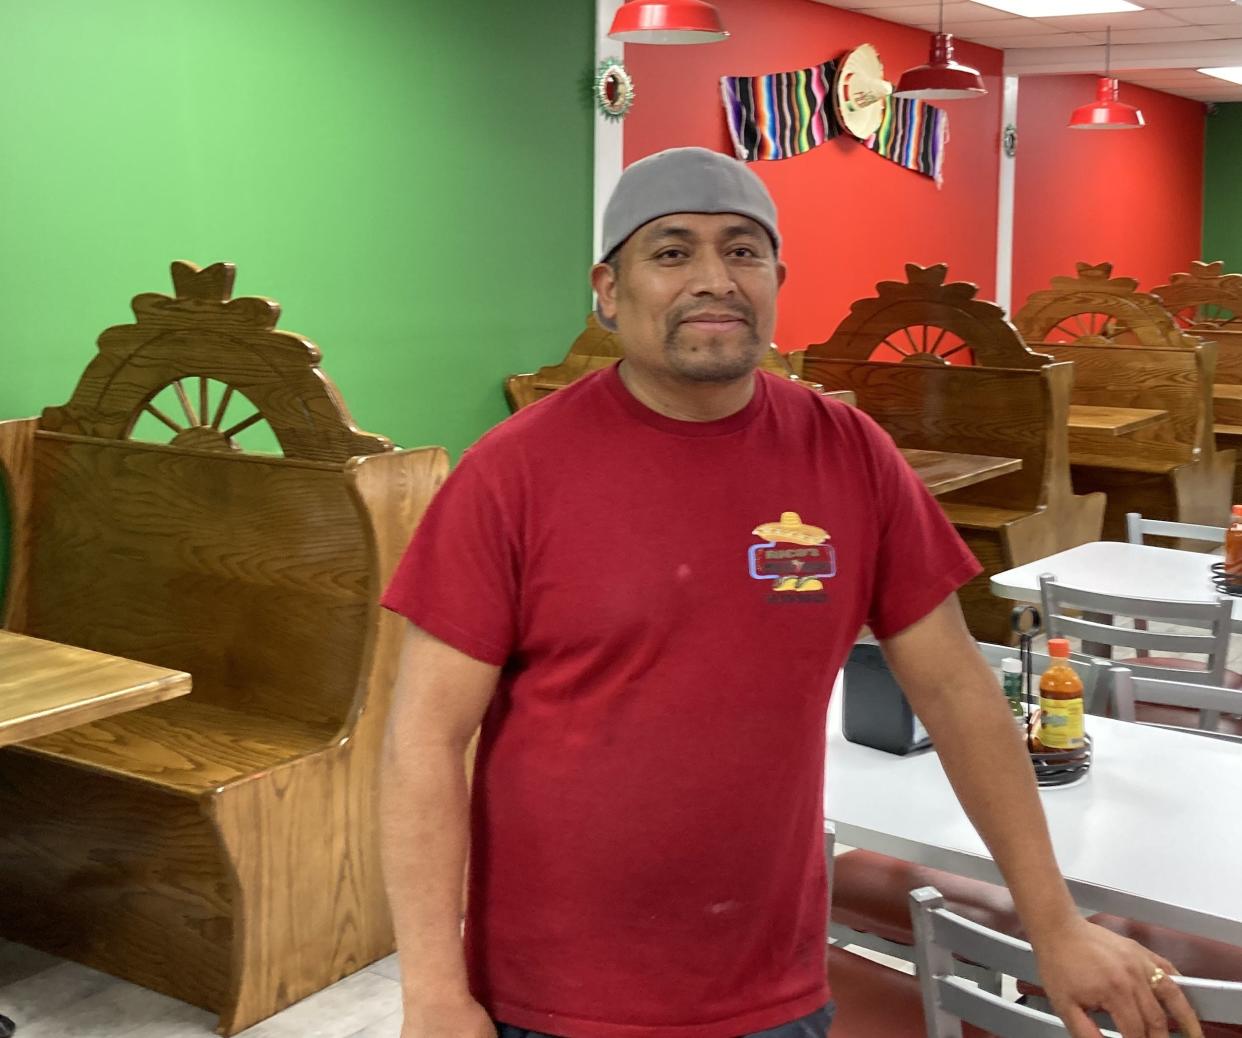 Rico Hernandez opened Rico's Mexitacos restaurant at 1722 North Kerr Ave. in Wilmington, N.C. in January 2023.